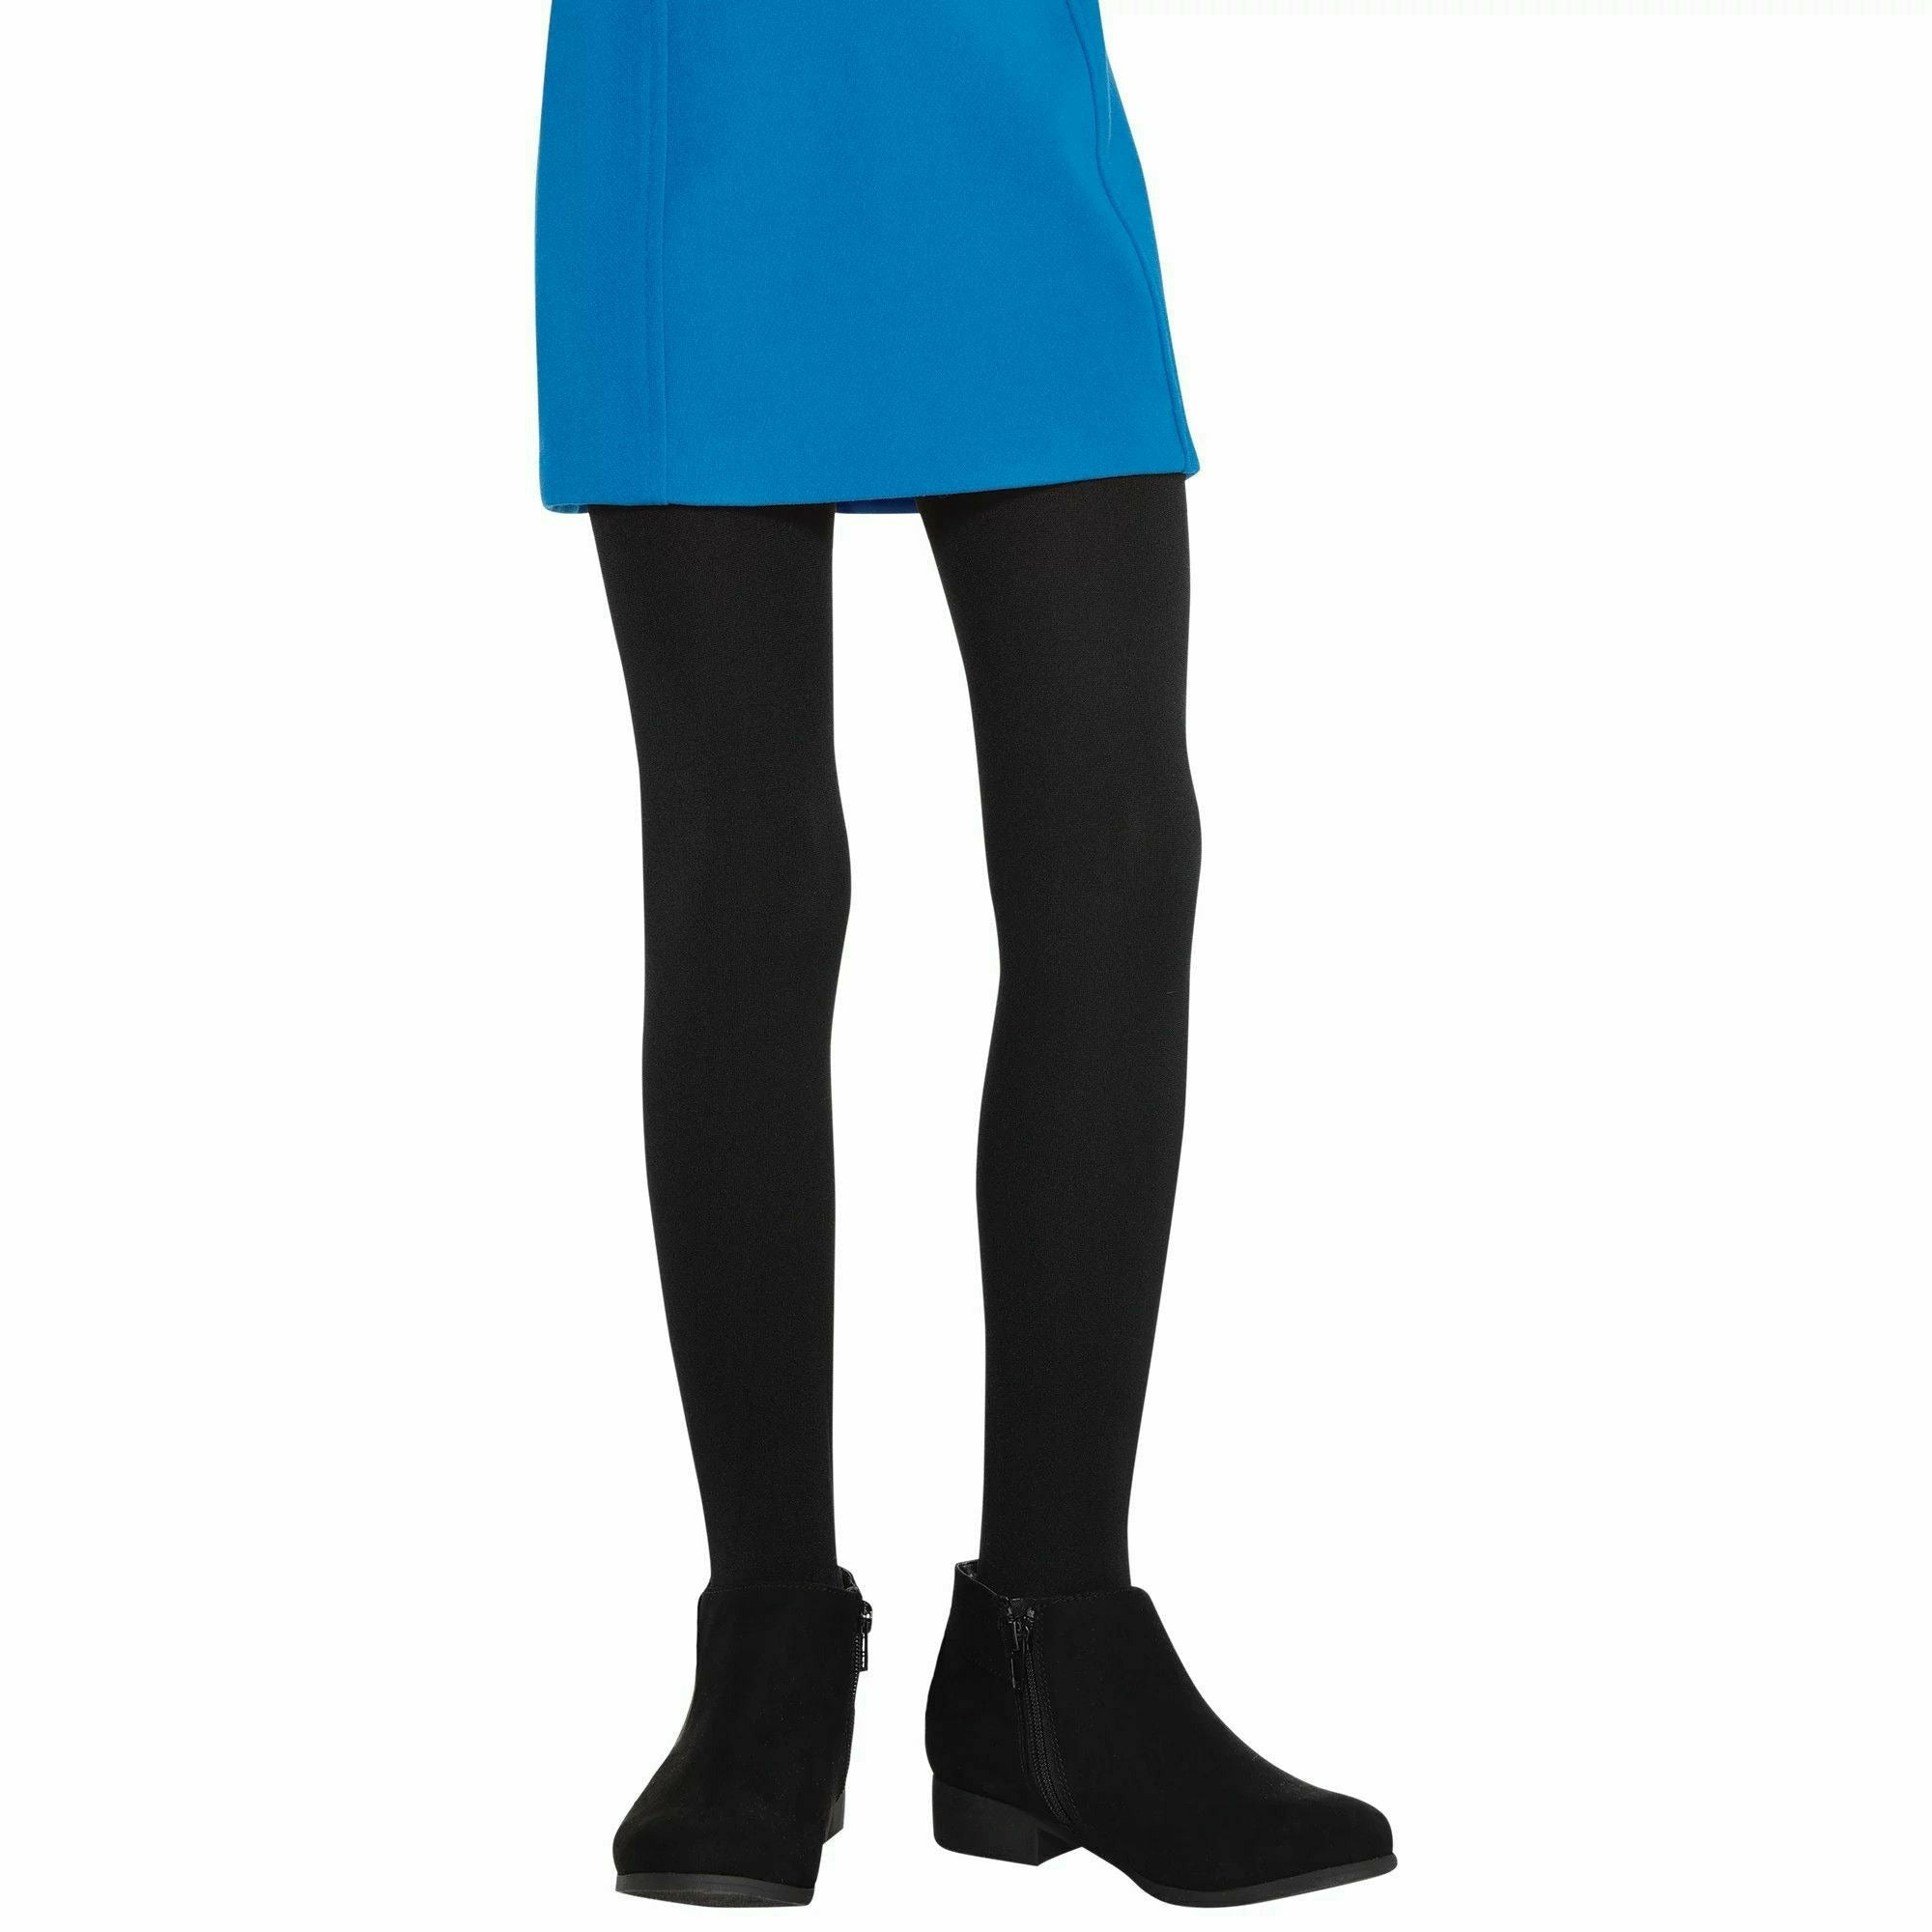 Amscan COSTUMES: ACCESSORIES Child Fleece Lined Tights - Small/Medium